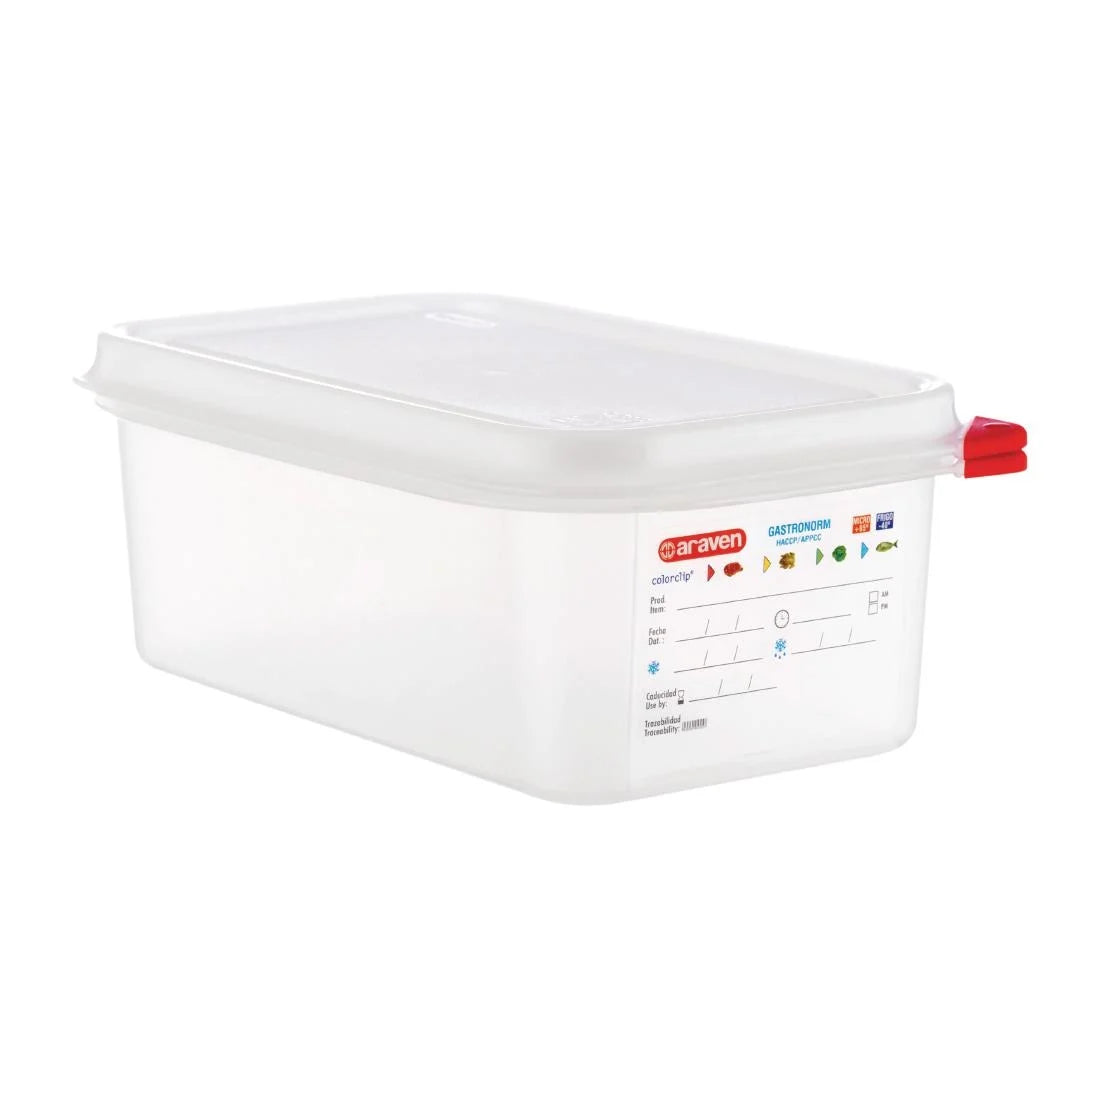 DL981 Araven Polypropylene 1/4 Gastronorm Food Containers 2.8Ltr (Pack of 4) JD Catering Equipment Solutions Ltd